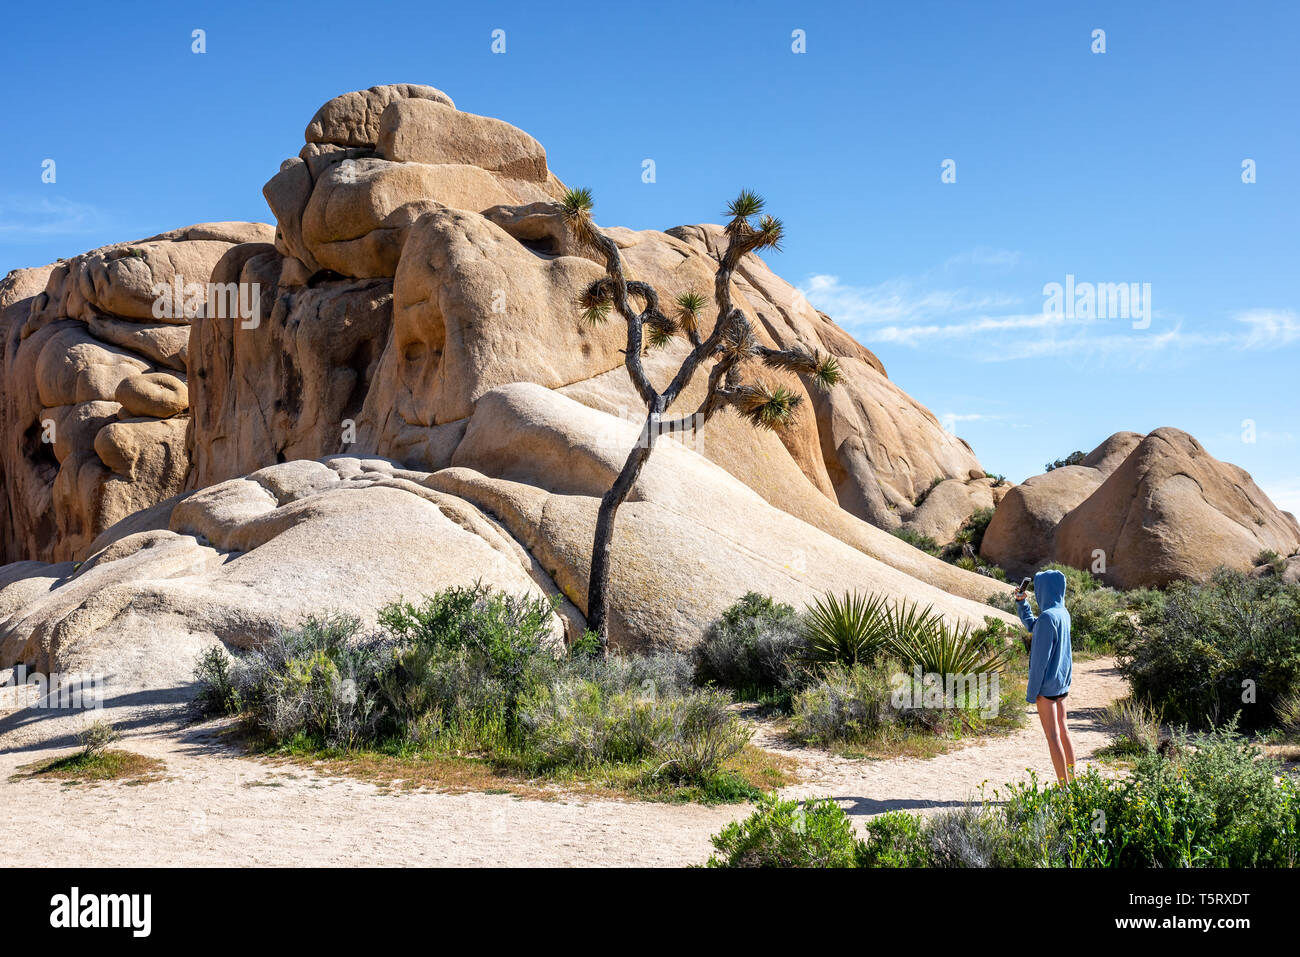 Young tourist in Joshua Tree National Park taking a phone photo of a Joshua tree with giant rock formation near Jumbo Rocks. Stock Photo